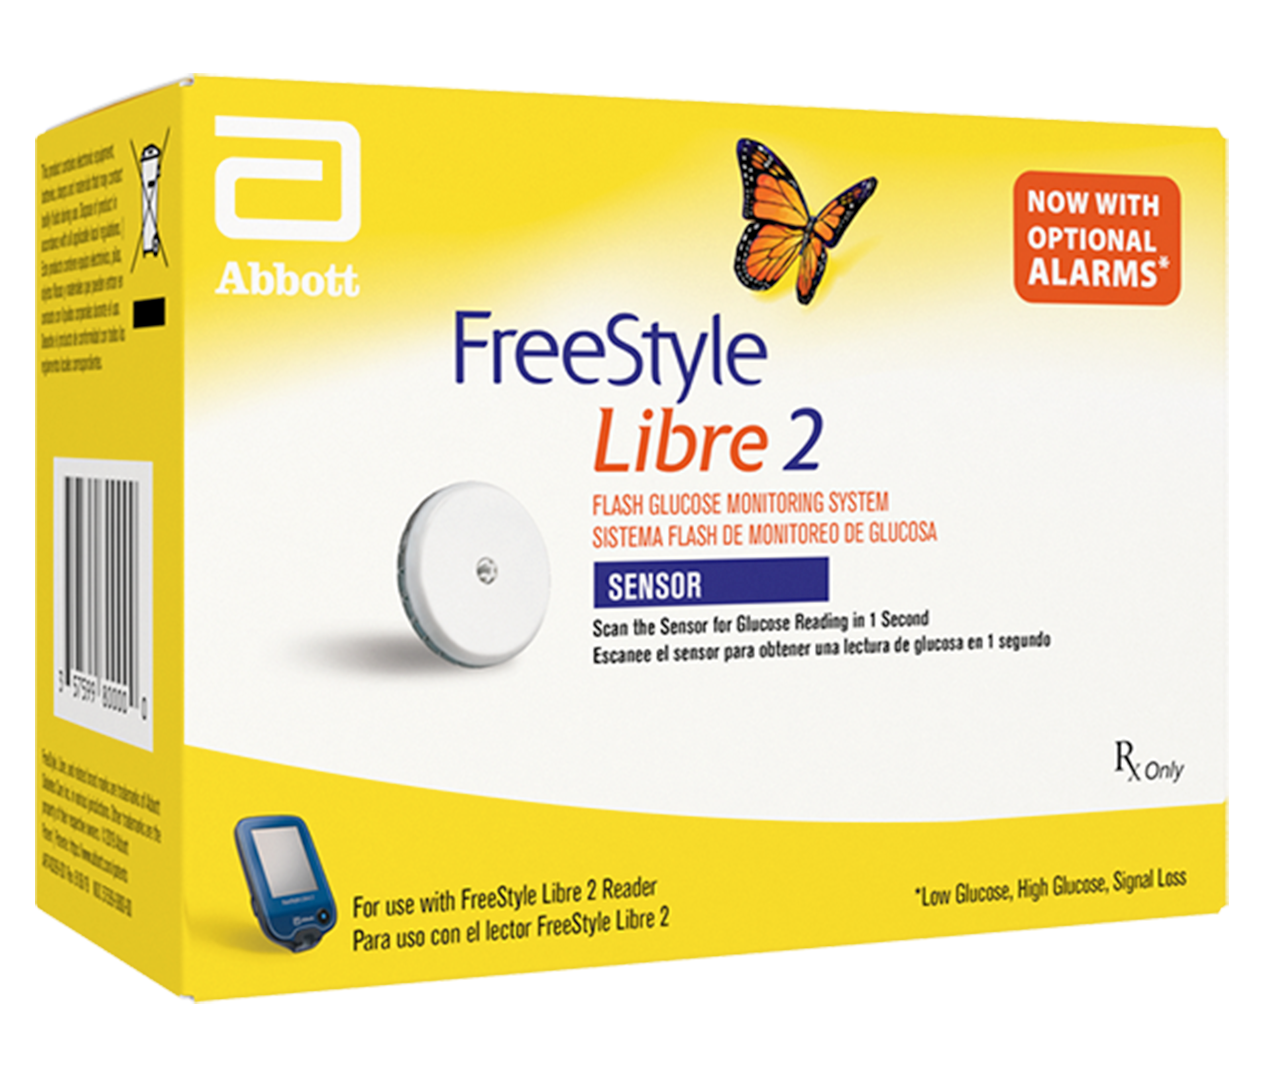 How to Use the FreeStyle Libre 2 Mobile App(*) 